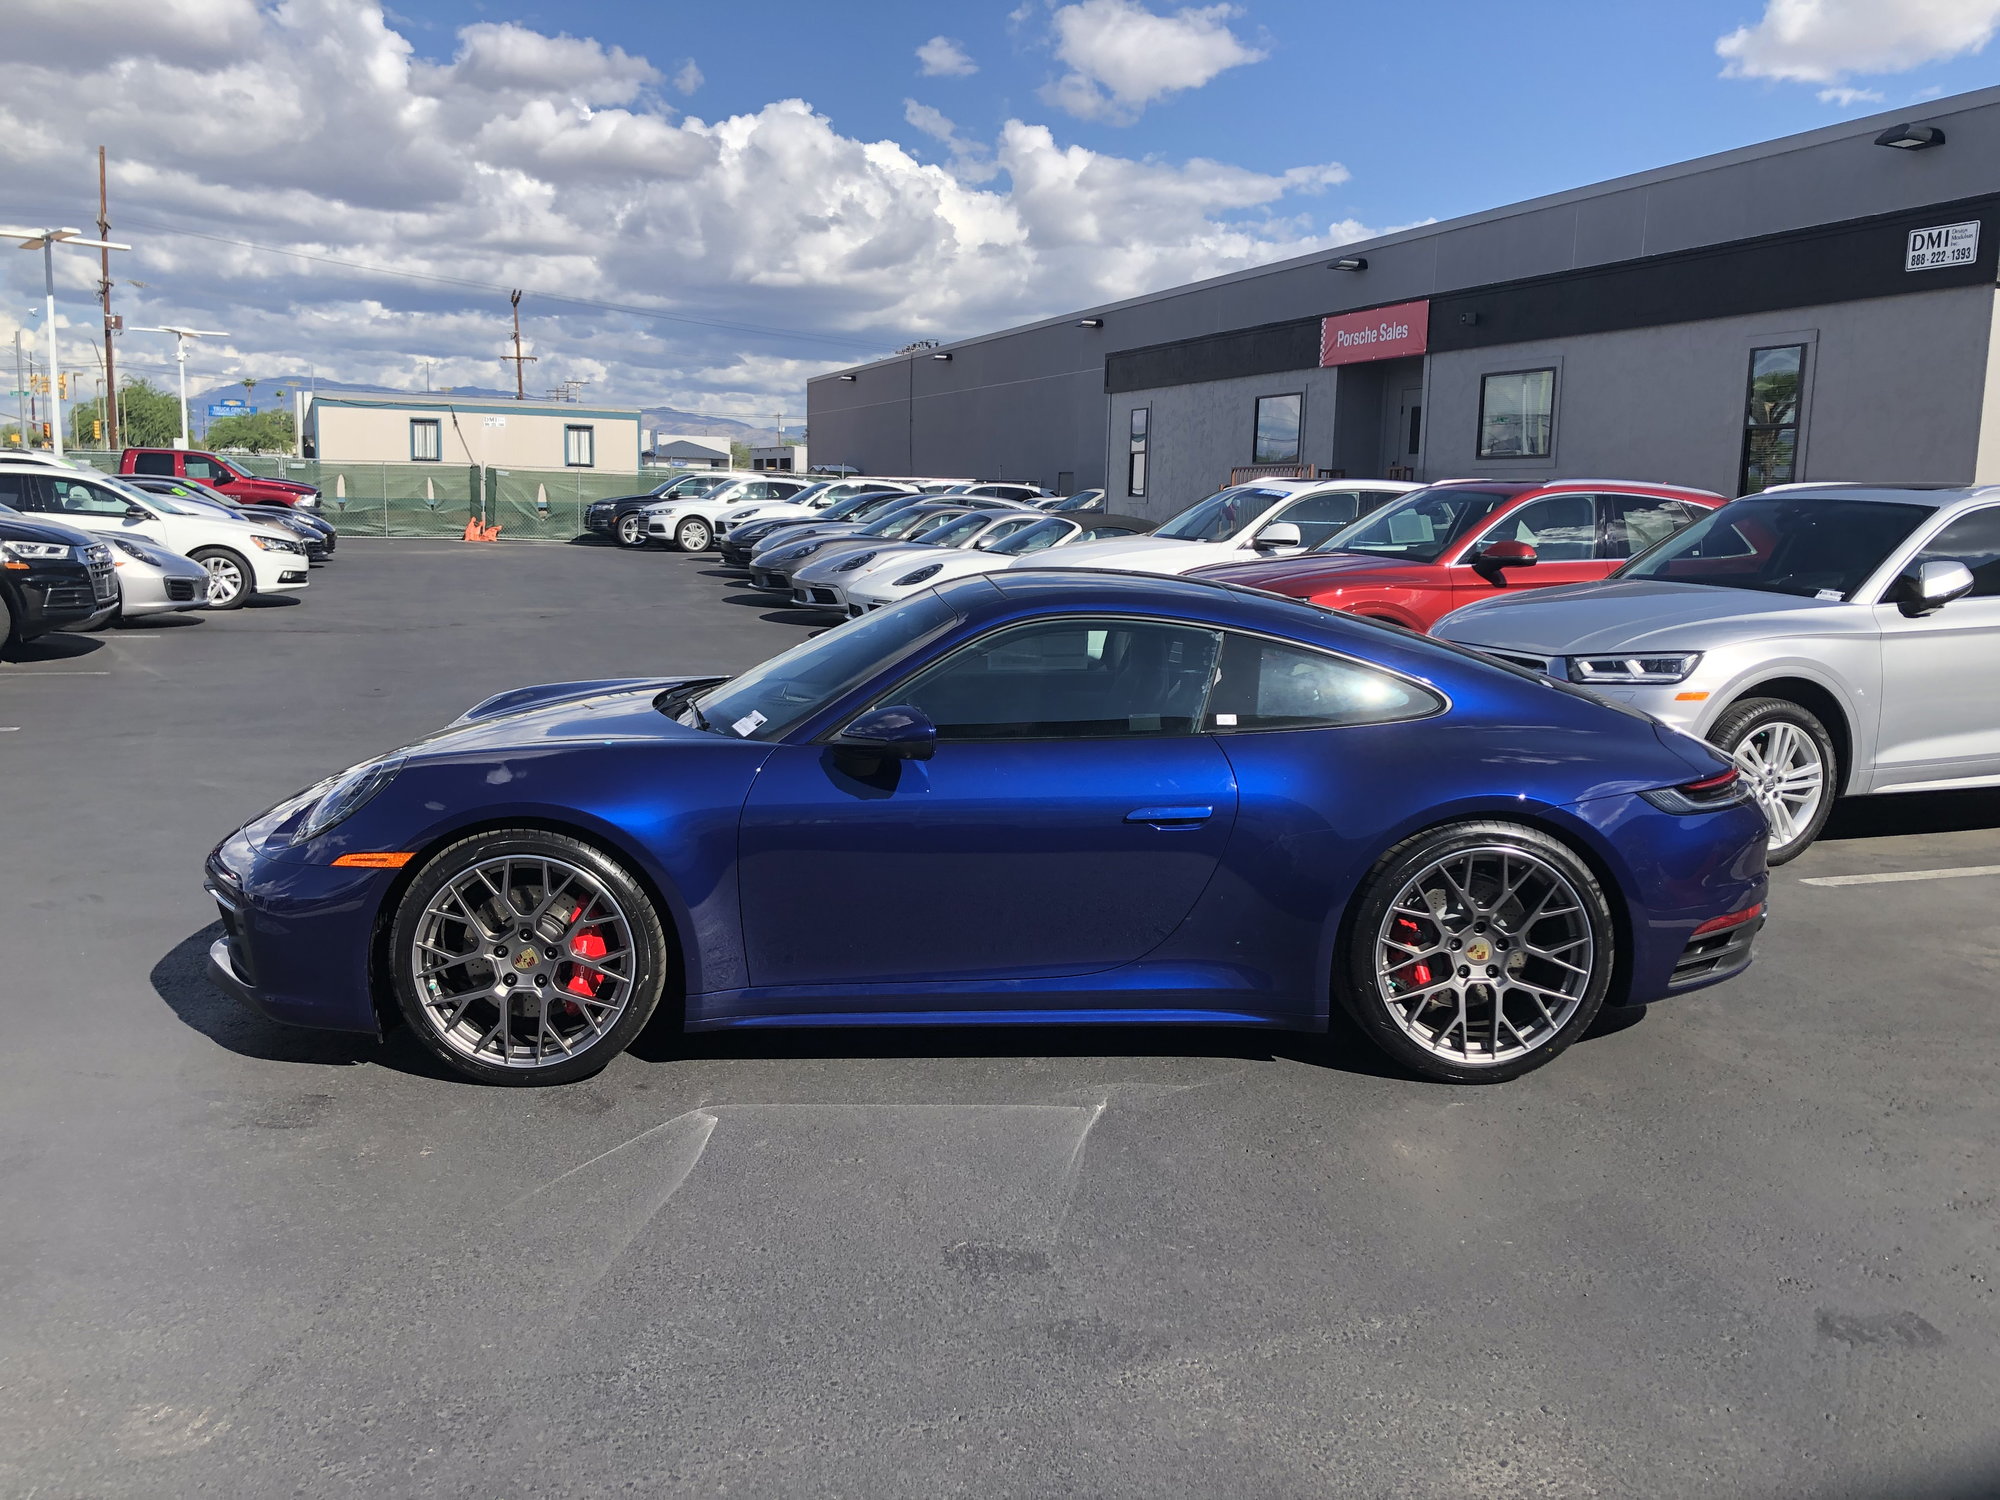 2020 Gentian Blue 992 911 4s Available For Immediate Delivery Rennlist Pors...